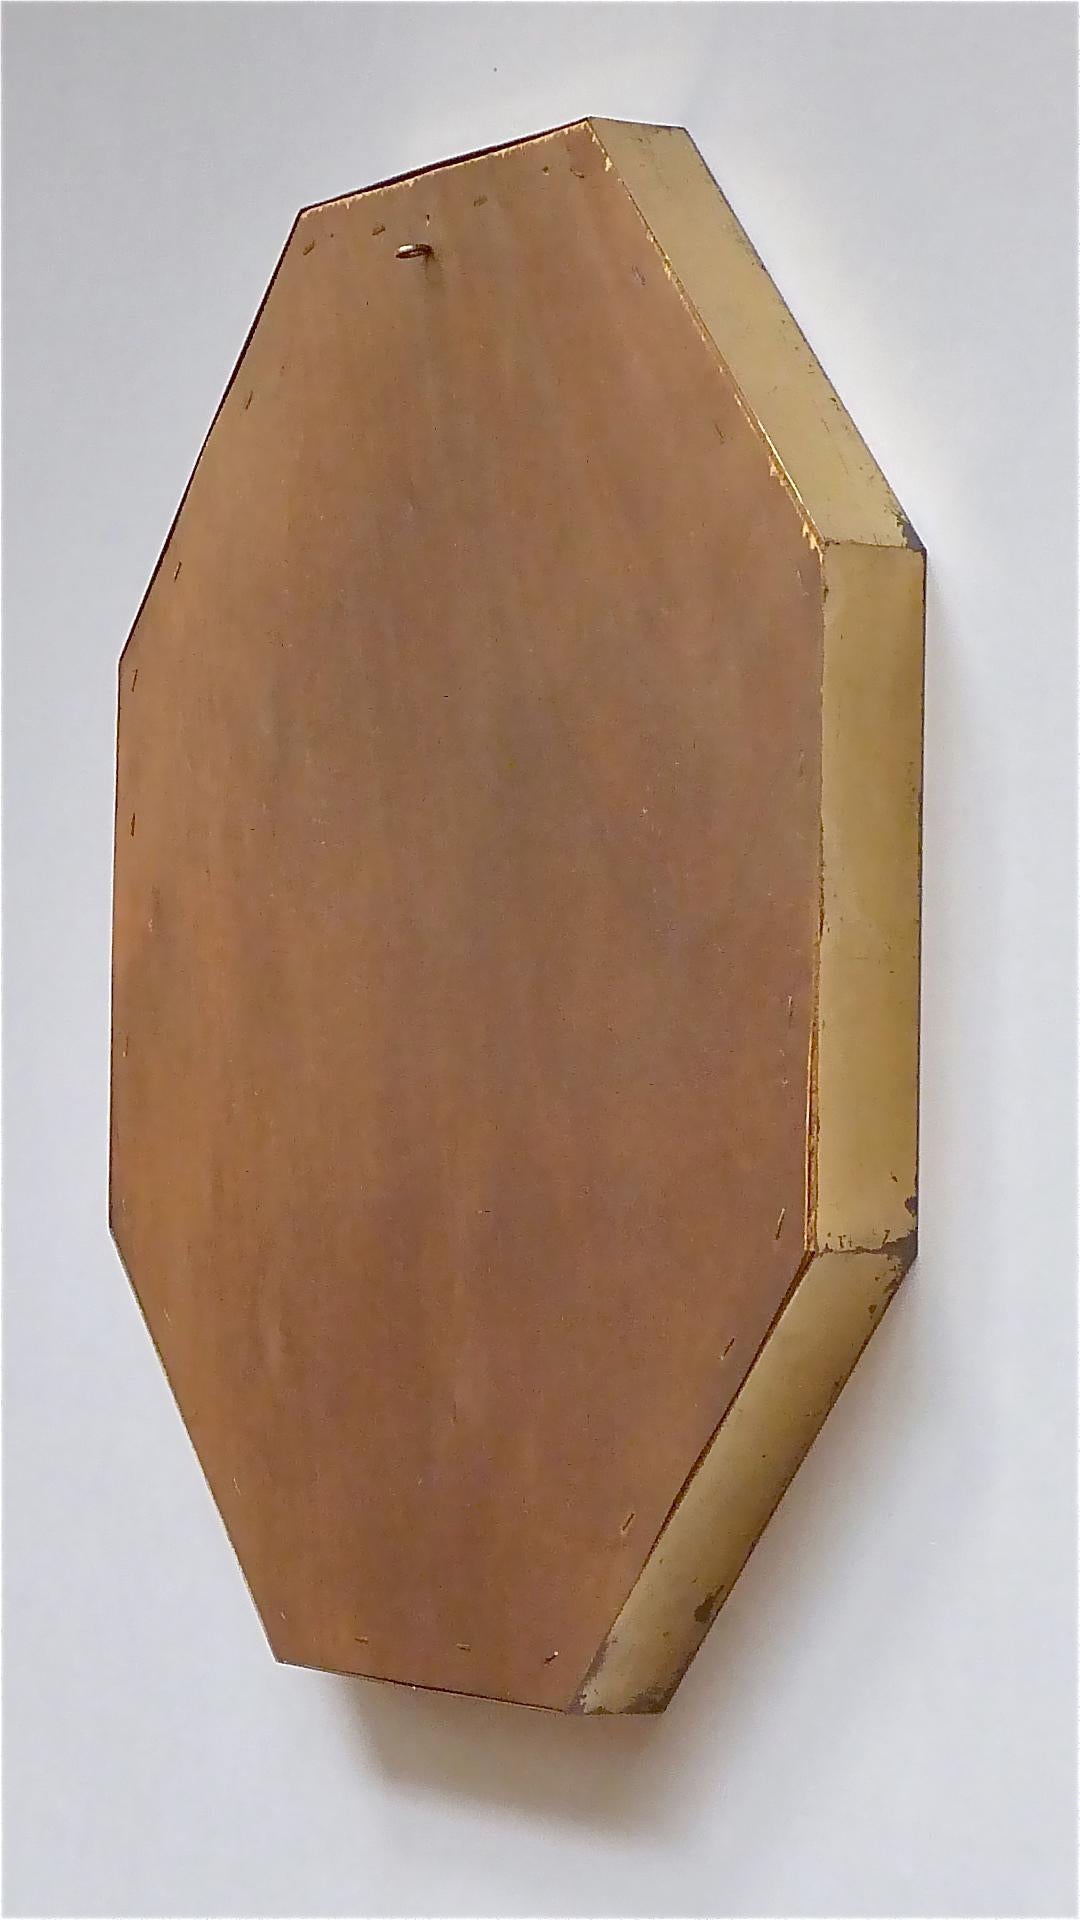 Large Maison Jansen Octagonal Patinated Brass Mirror Crespi Rizzo Style, 1970s For Sale 10